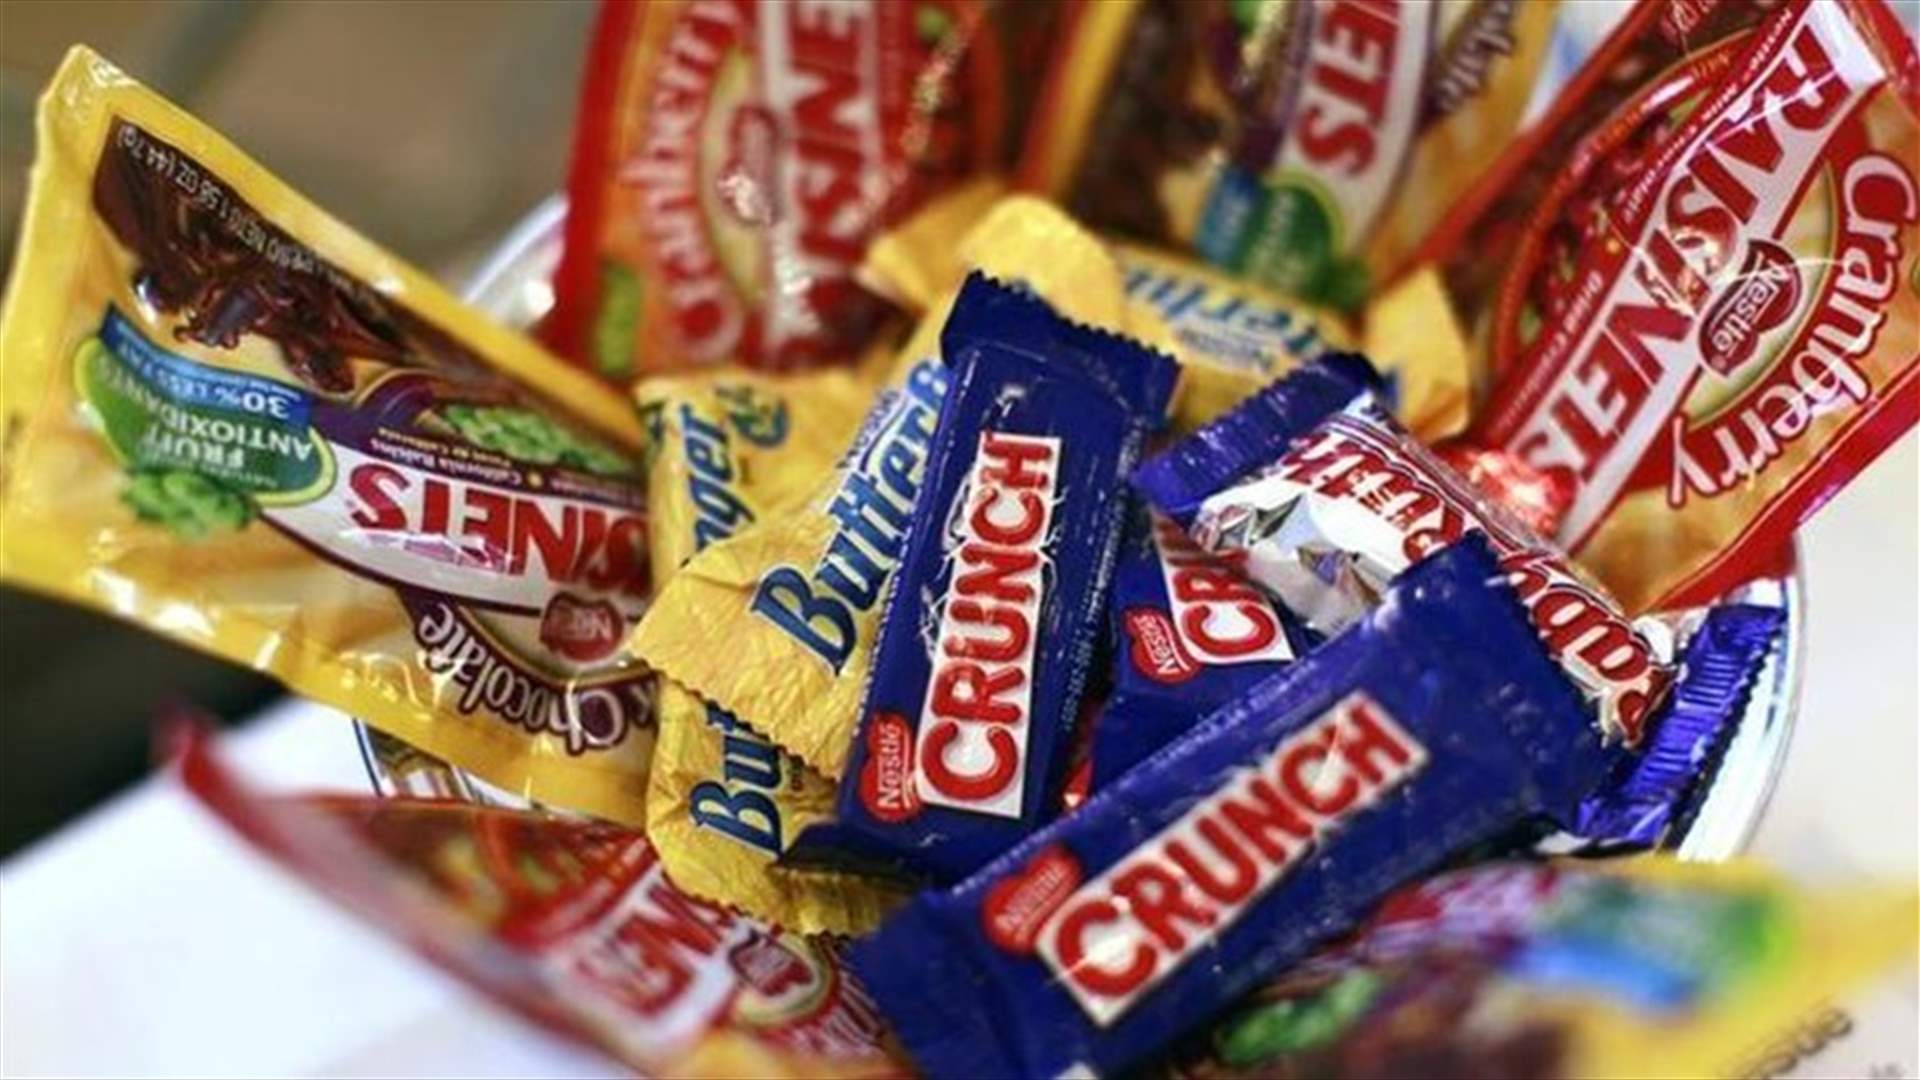 US Candy Makers Band Together To Reduce Calories